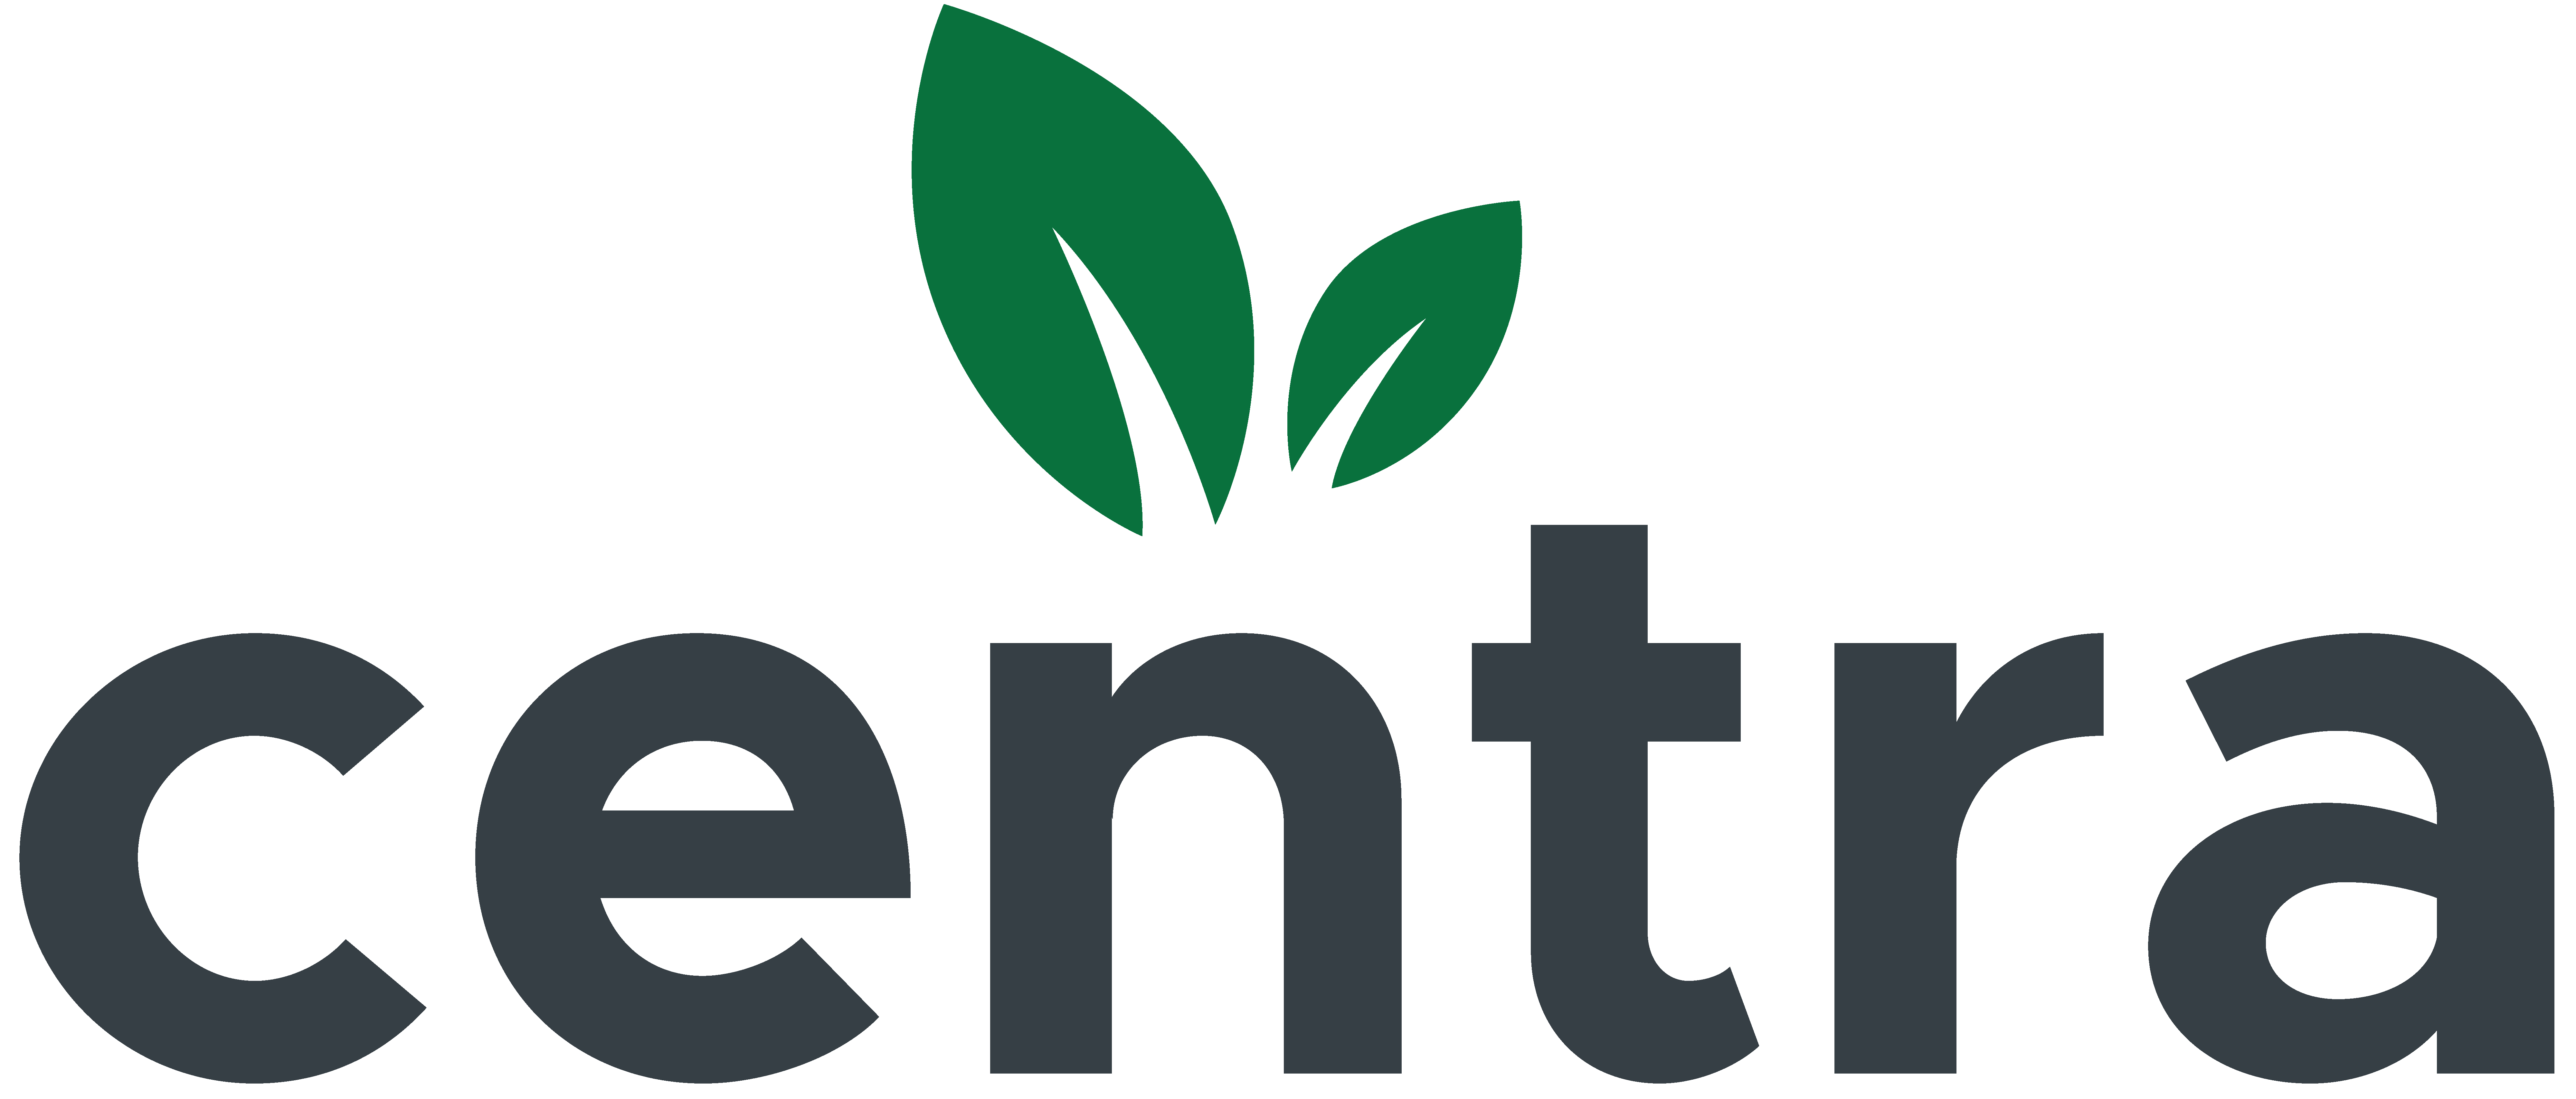 Centra – Integrated Solid Waste Management Solution